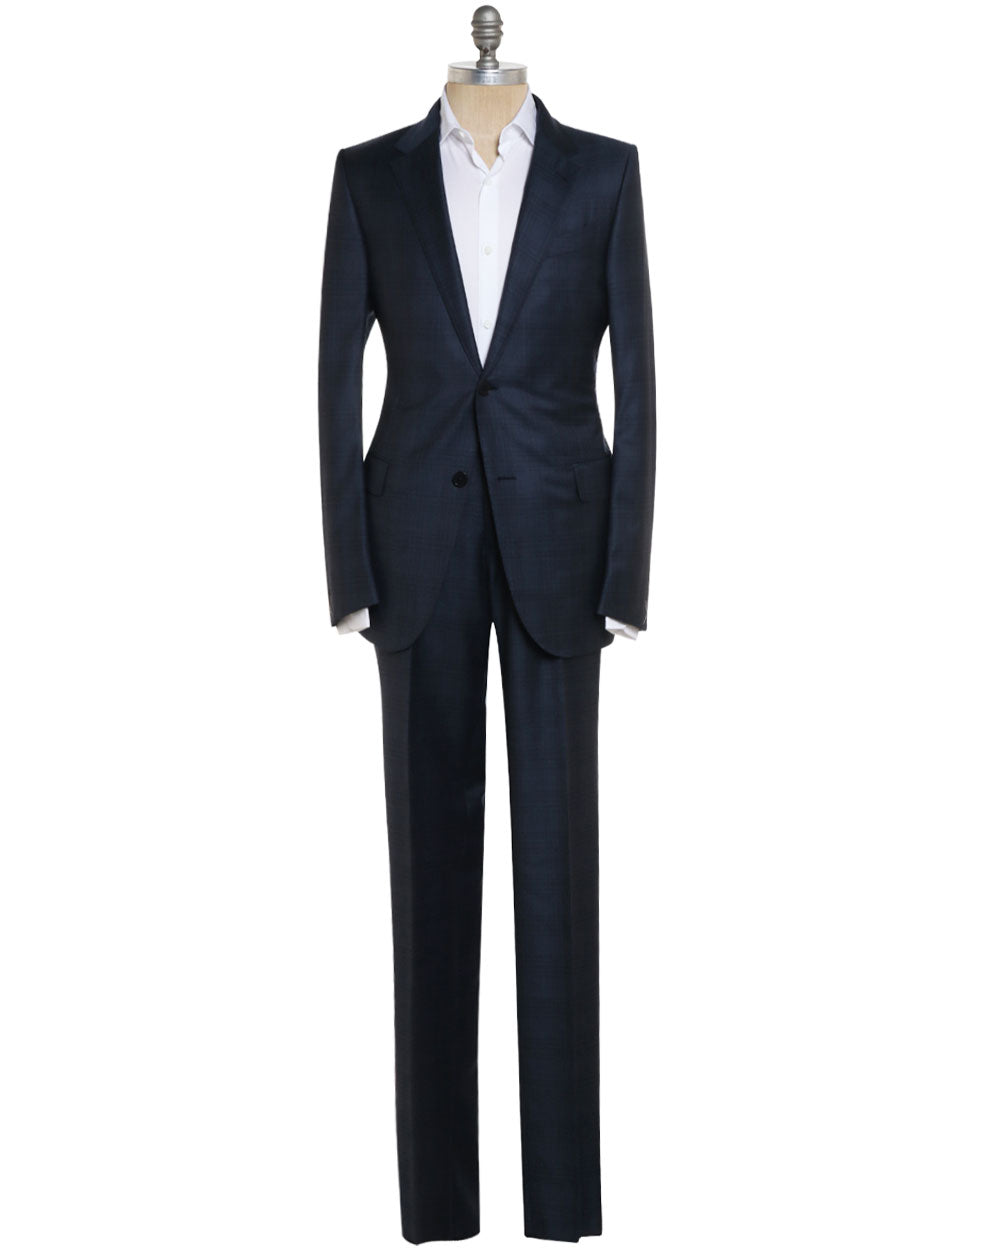 Blue and Grey Trofeo Wool Plaid Suit